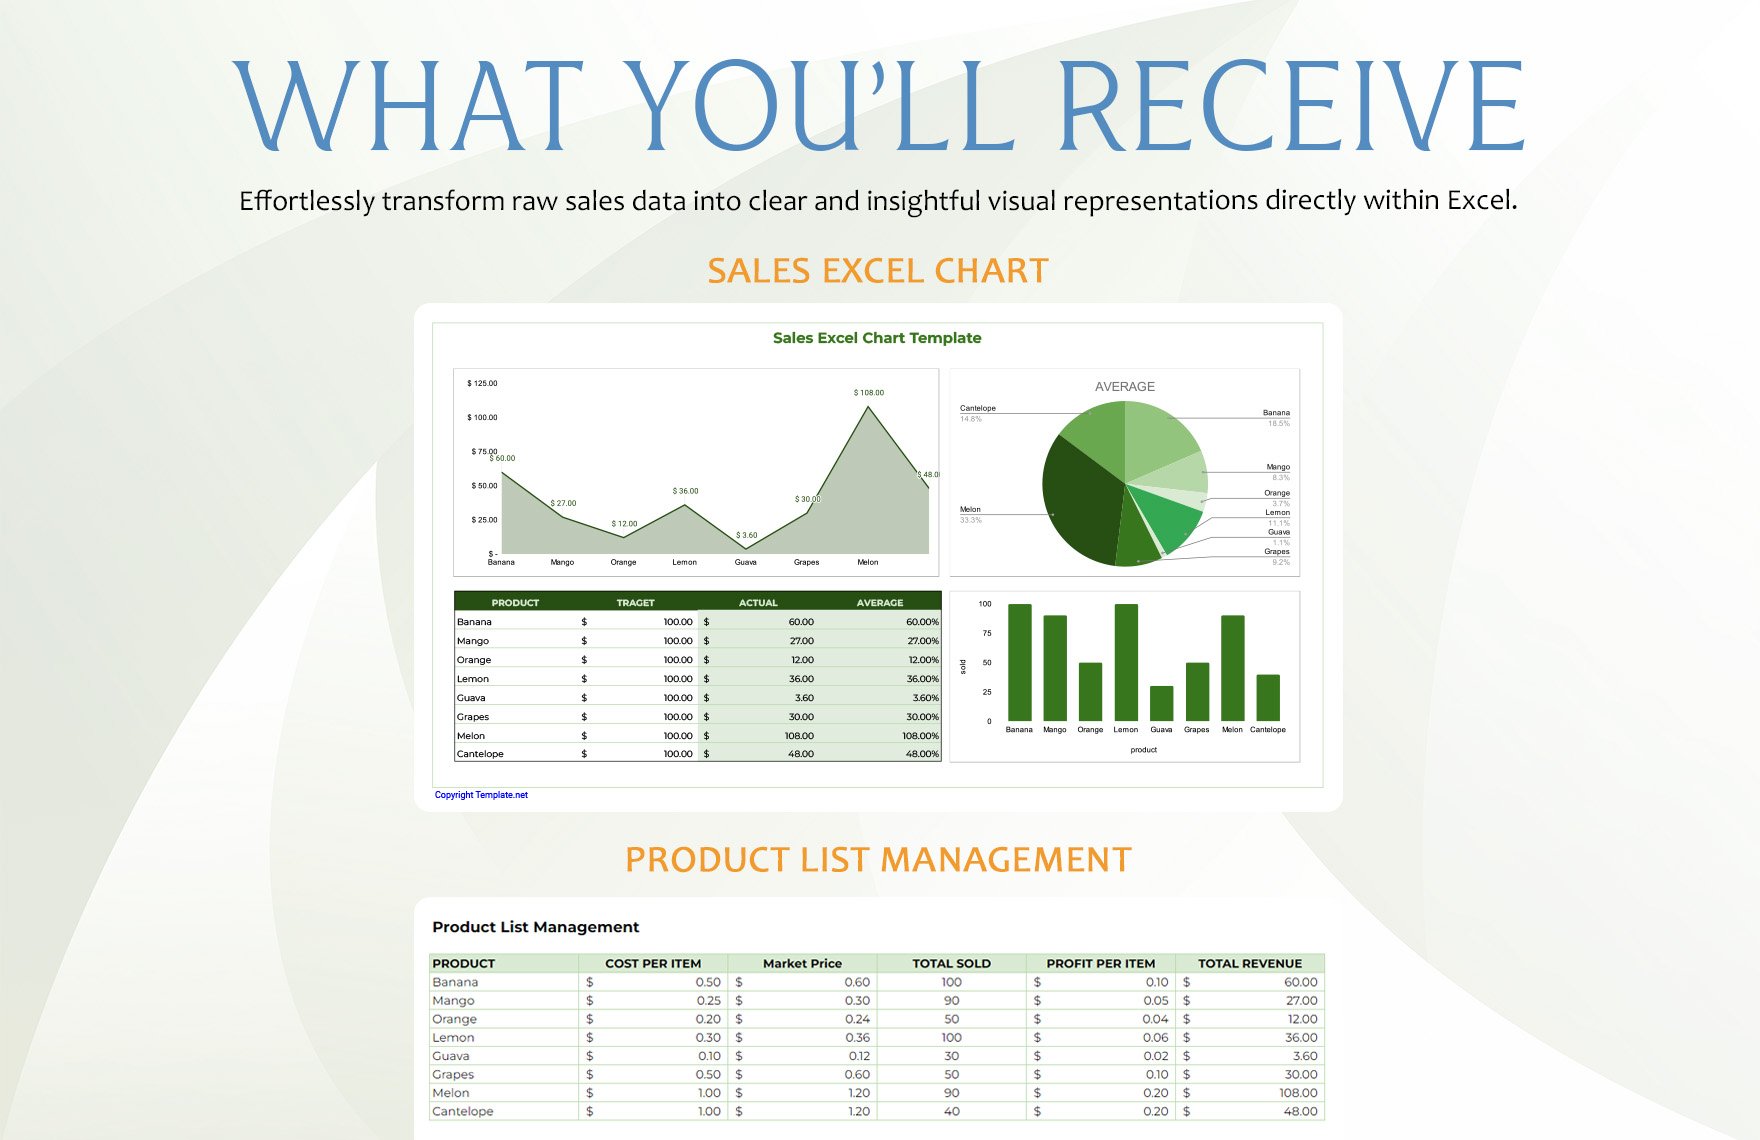 Sales Excel Chart Template